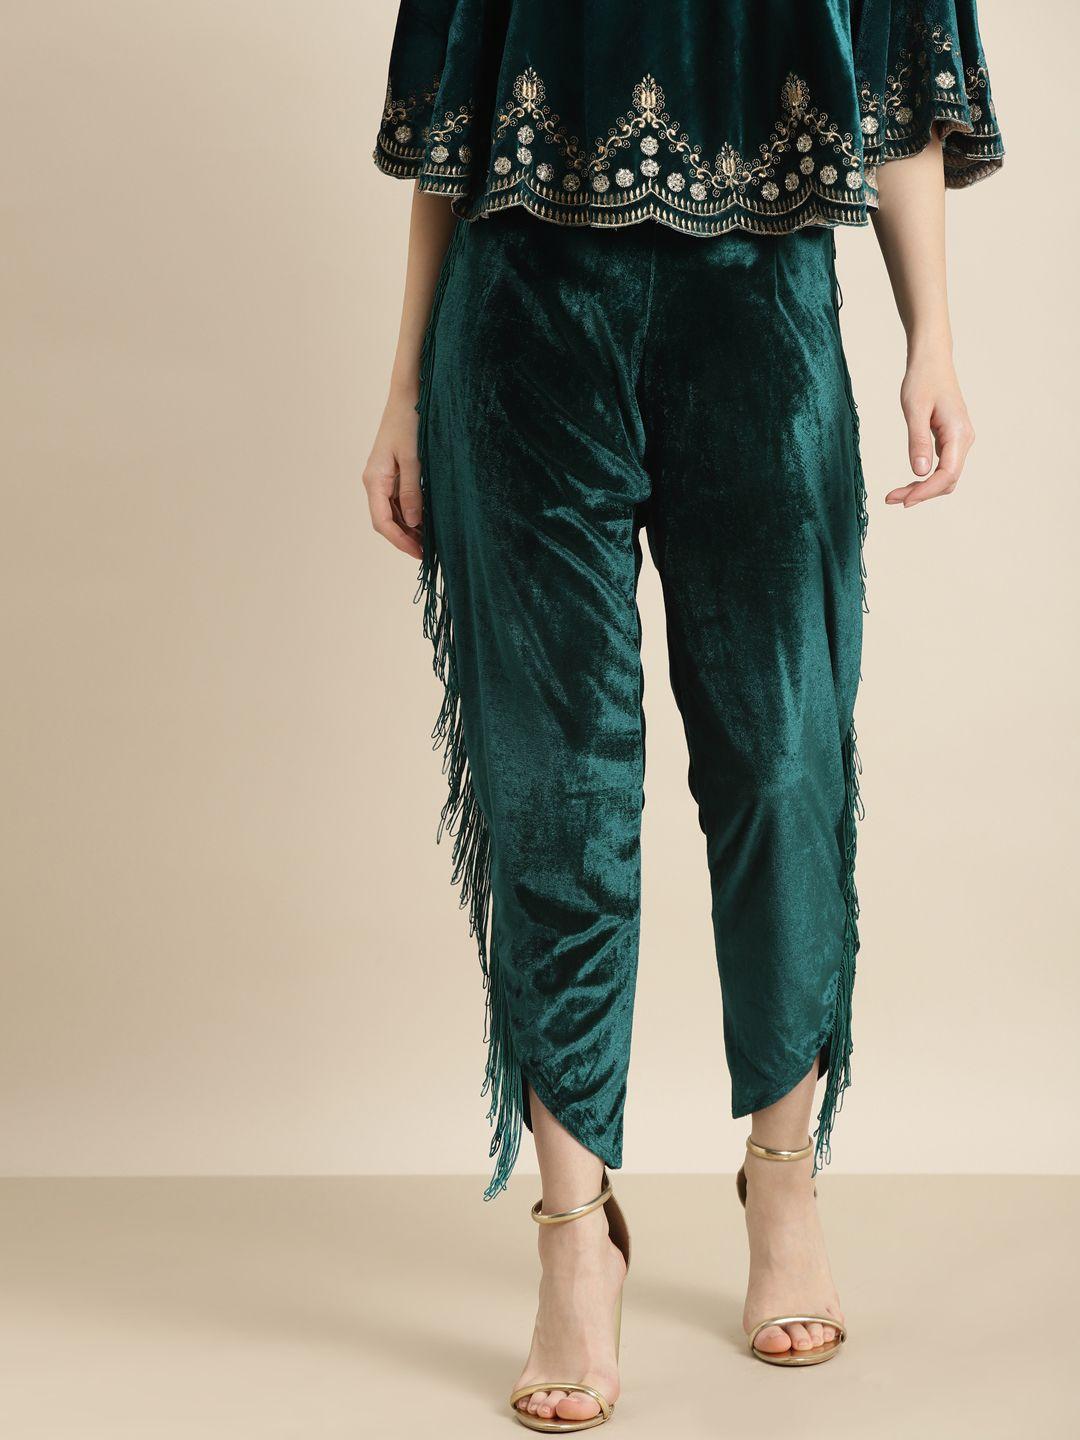 shae by sassafras women teal green trousers